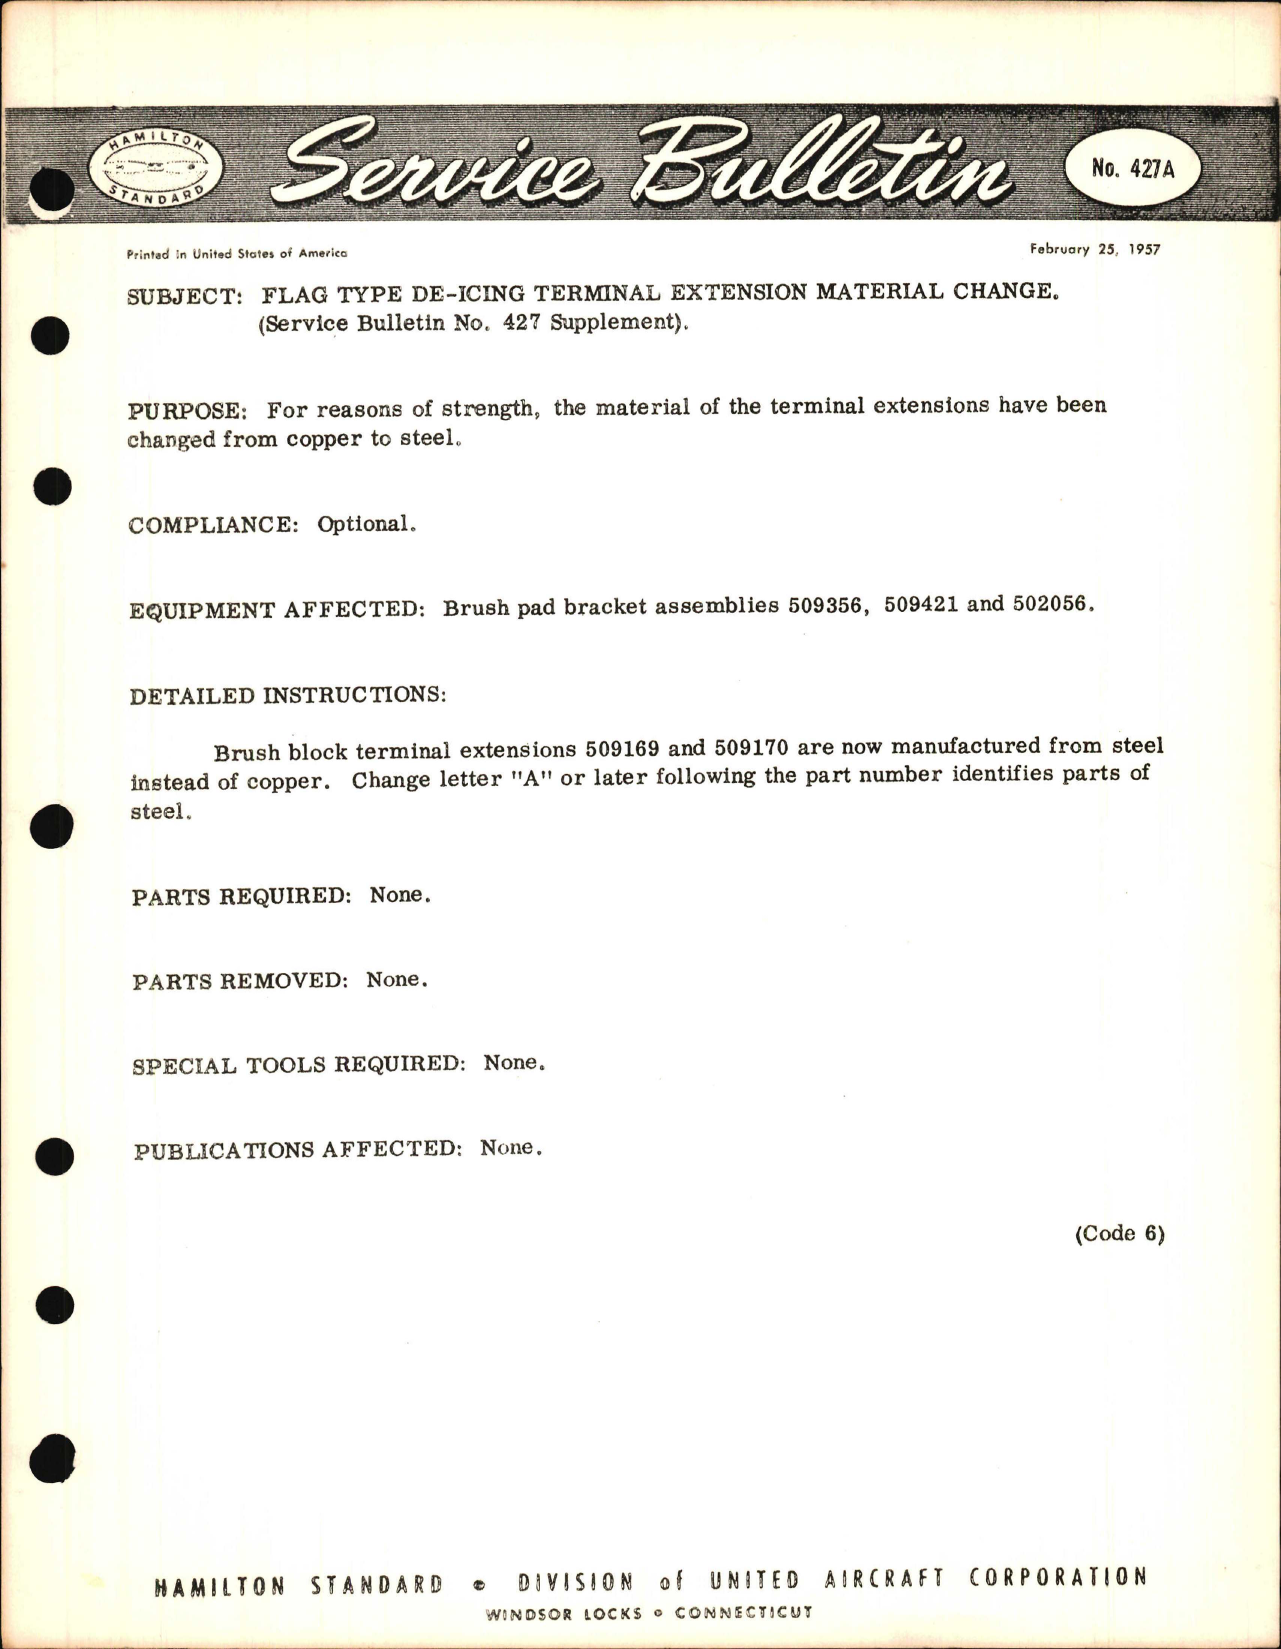 Sample page 1 from AirCorps Library document: Flag Type De-Icing Terminal Extension Material Change